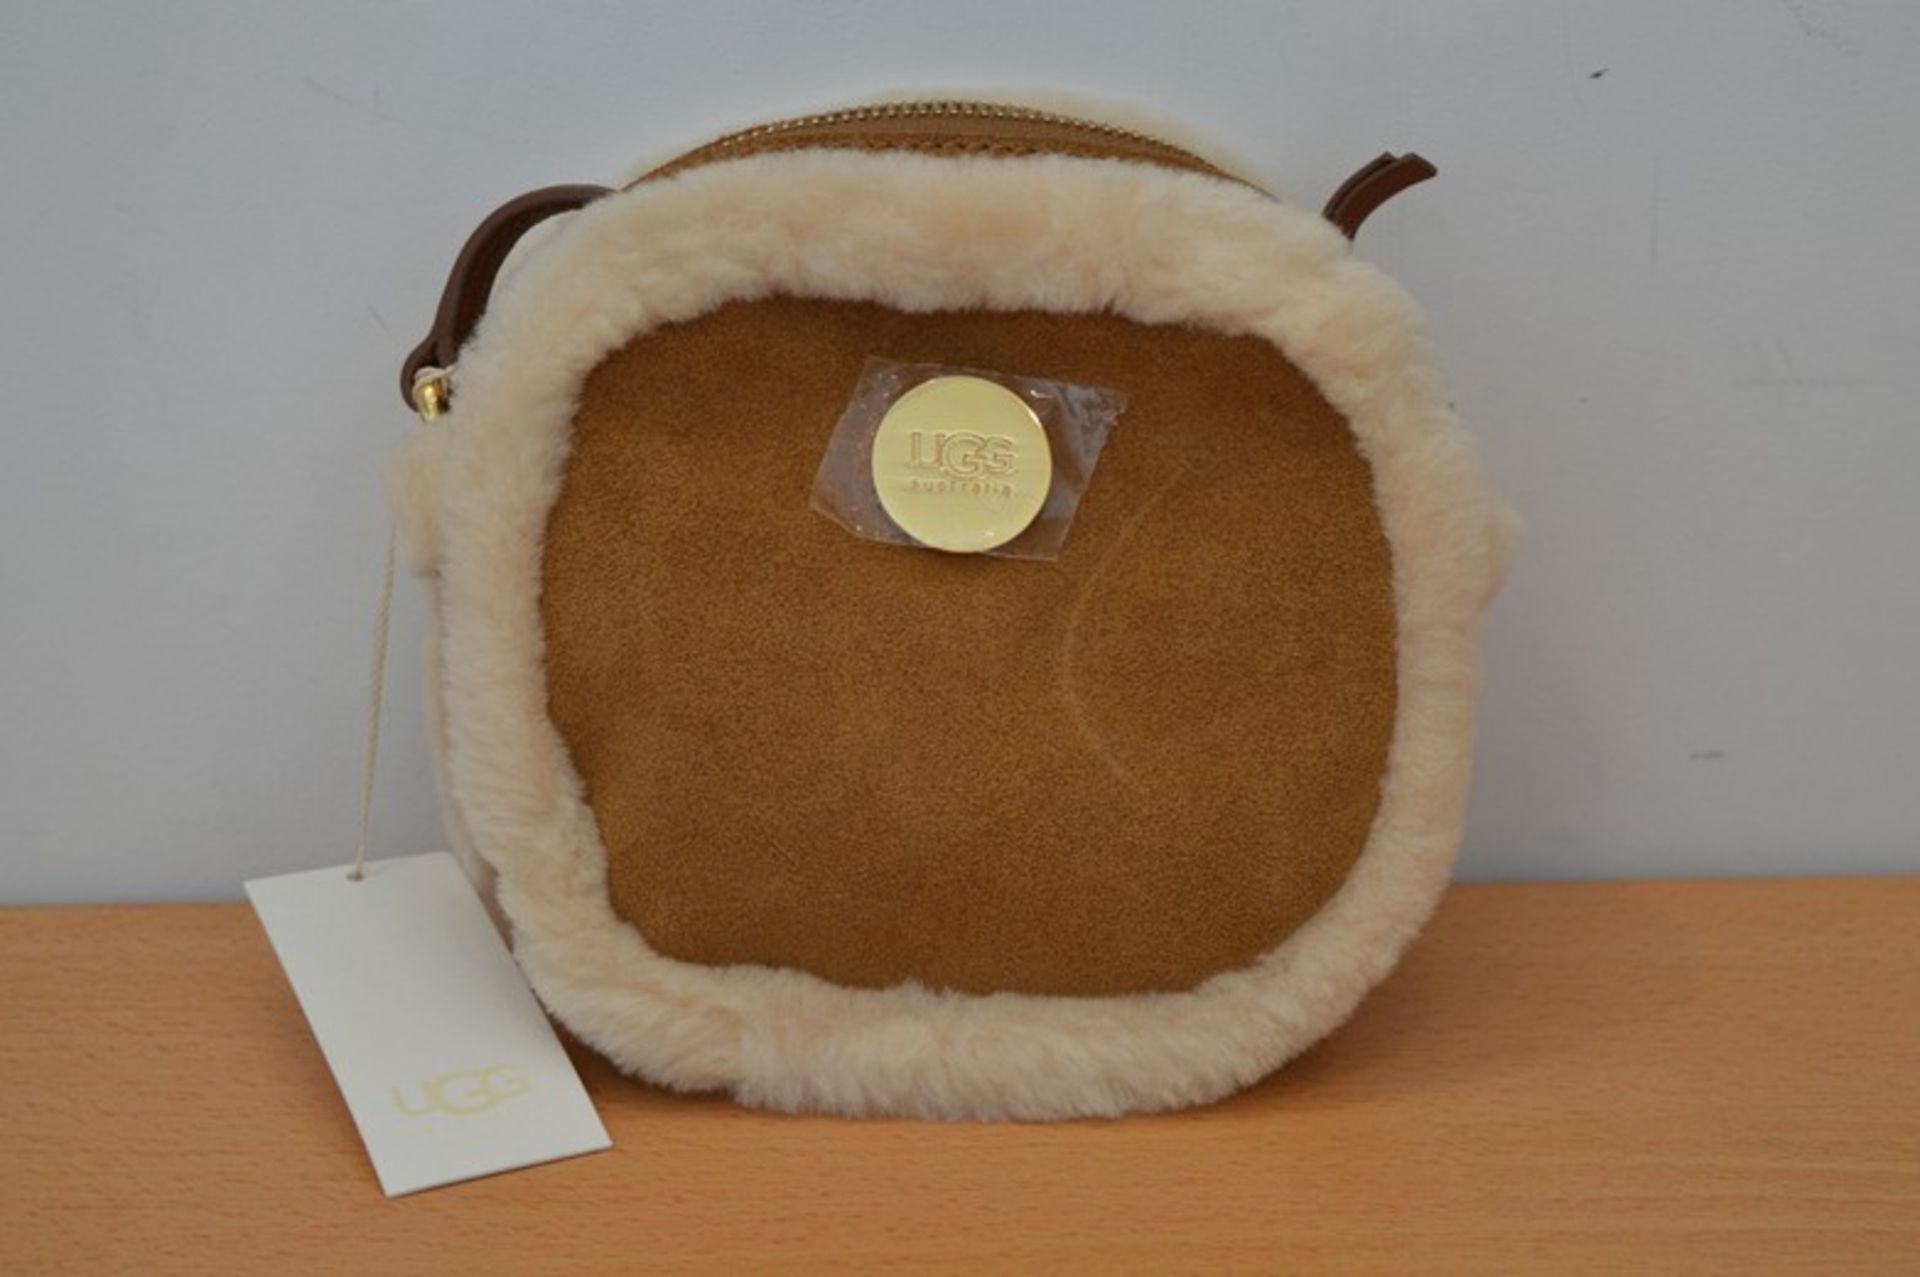 BRAND NEW WITH LABELS AND DUSTBAG UGG CHESTNUT MINI LADIES BAG RRP £135 (DSSALVAGE)(06.05.15)